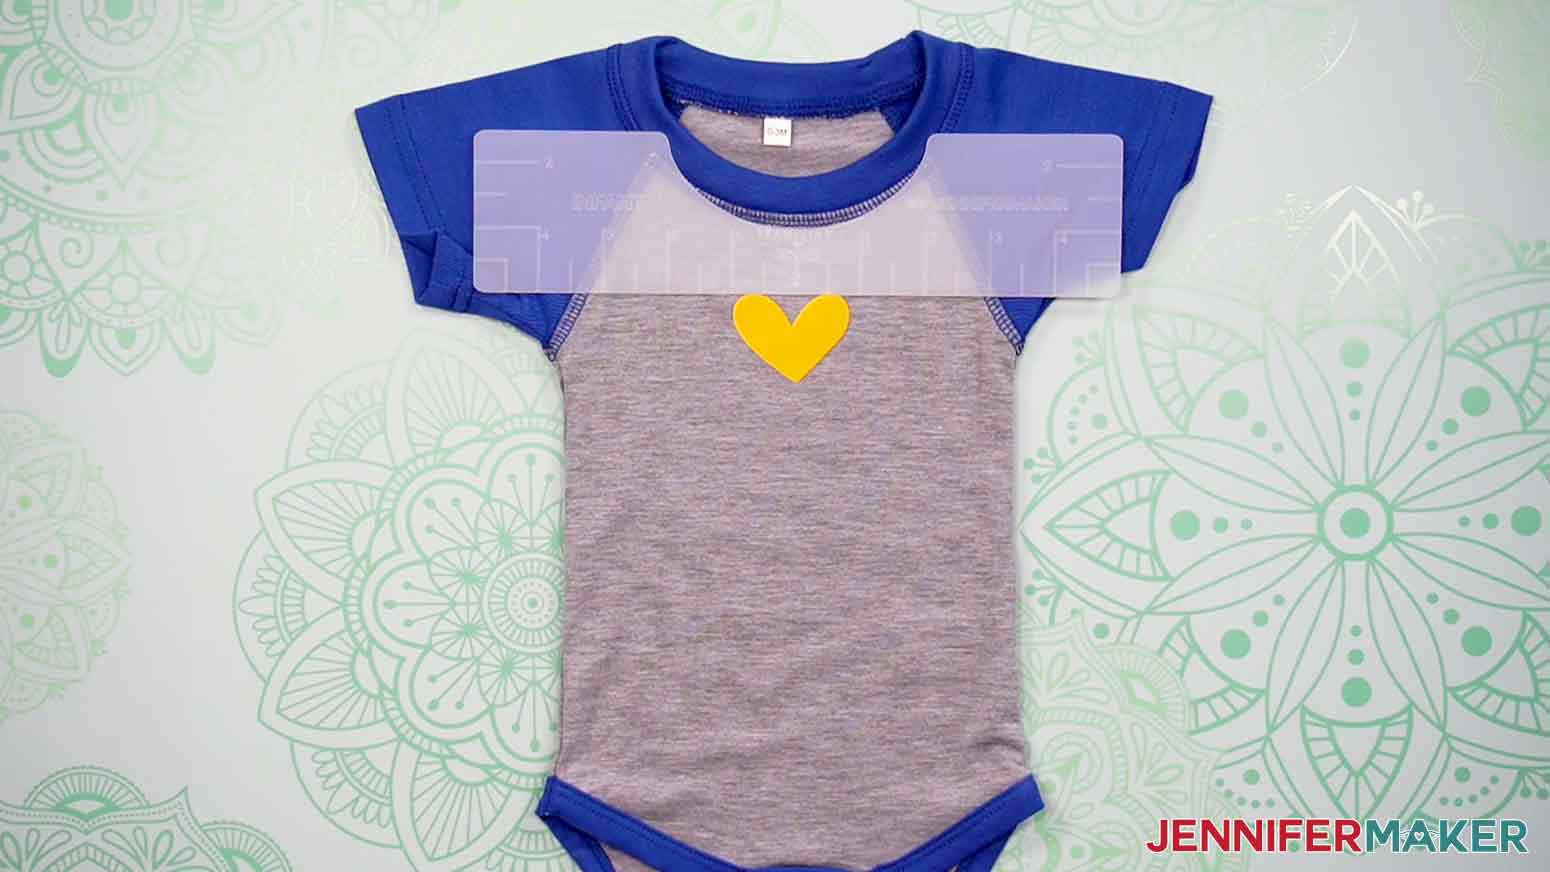 Here is an example of a grey and blue, infant onesie, with the plastic Infant T-Shirt Ruler aligned under the neckline of the onesie, showing the proper placement of a yellow heart decal.